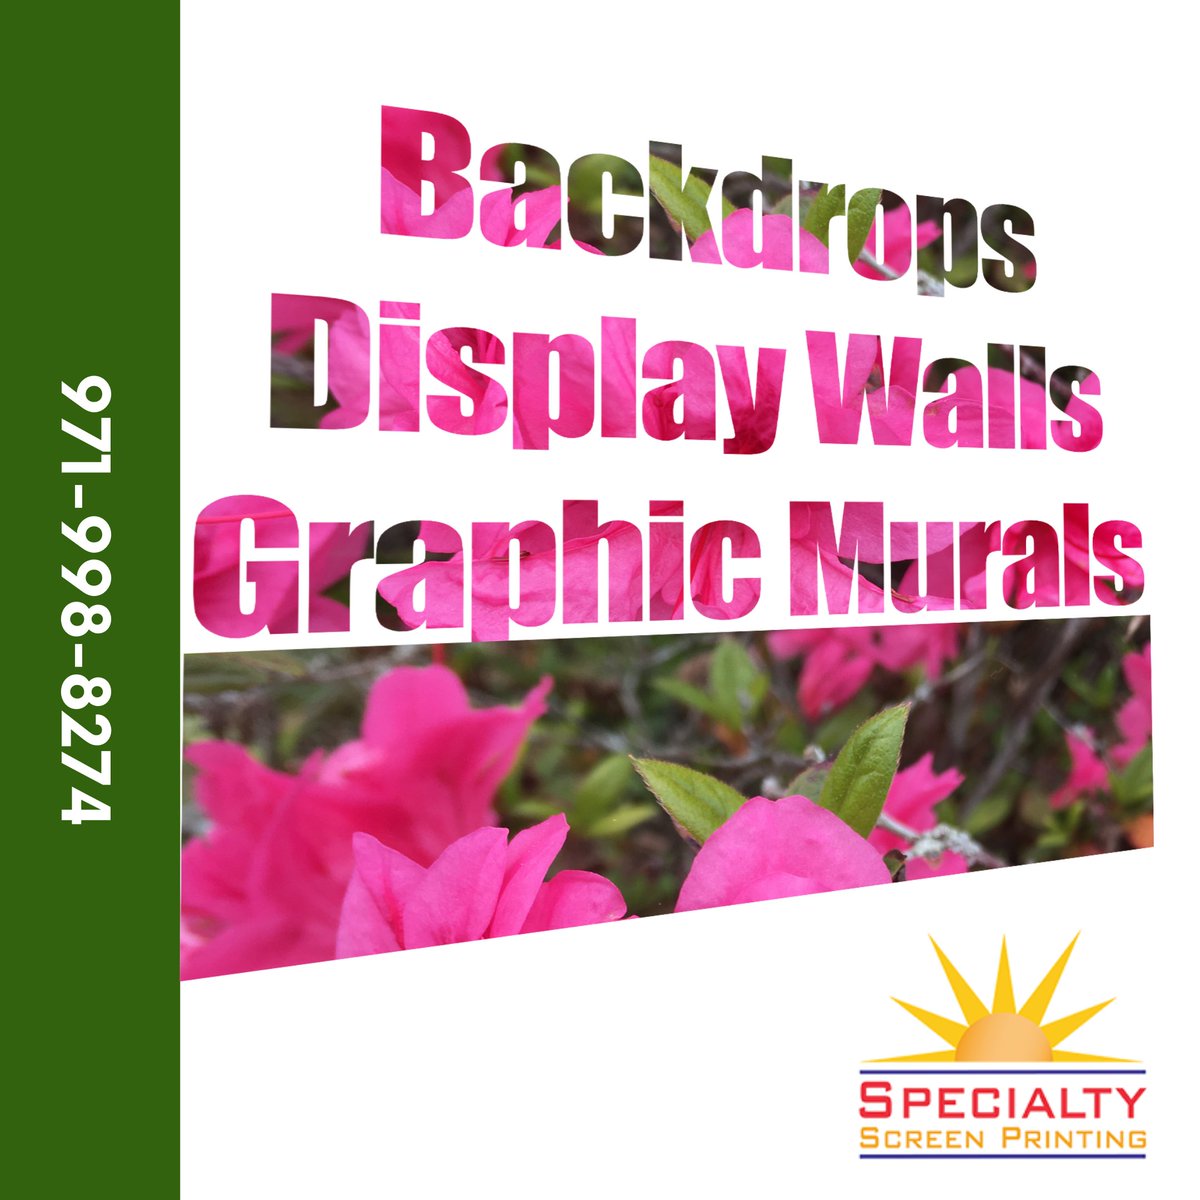 Making sure you grab their attention: trade shows, backdrops or graphic murals. We will print it. Call  971-998-8274.
#graphicmurals #tradeshow #kioskdesign #displays #backdrops #yamhillken #advertising #marketing #vinylsigns #graphicwalls